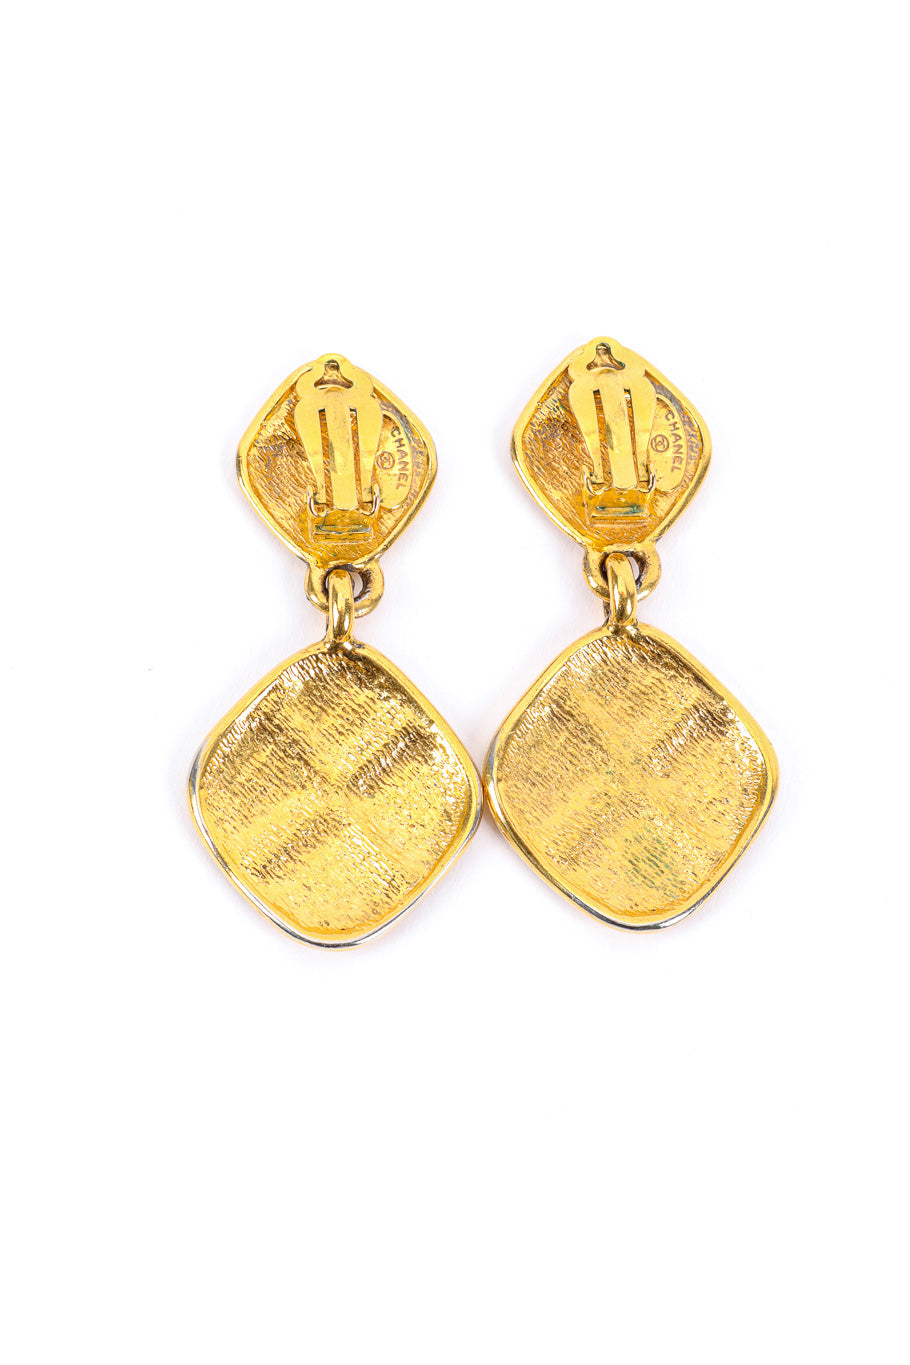 Chanel quilted dangling earrings back details @recessla